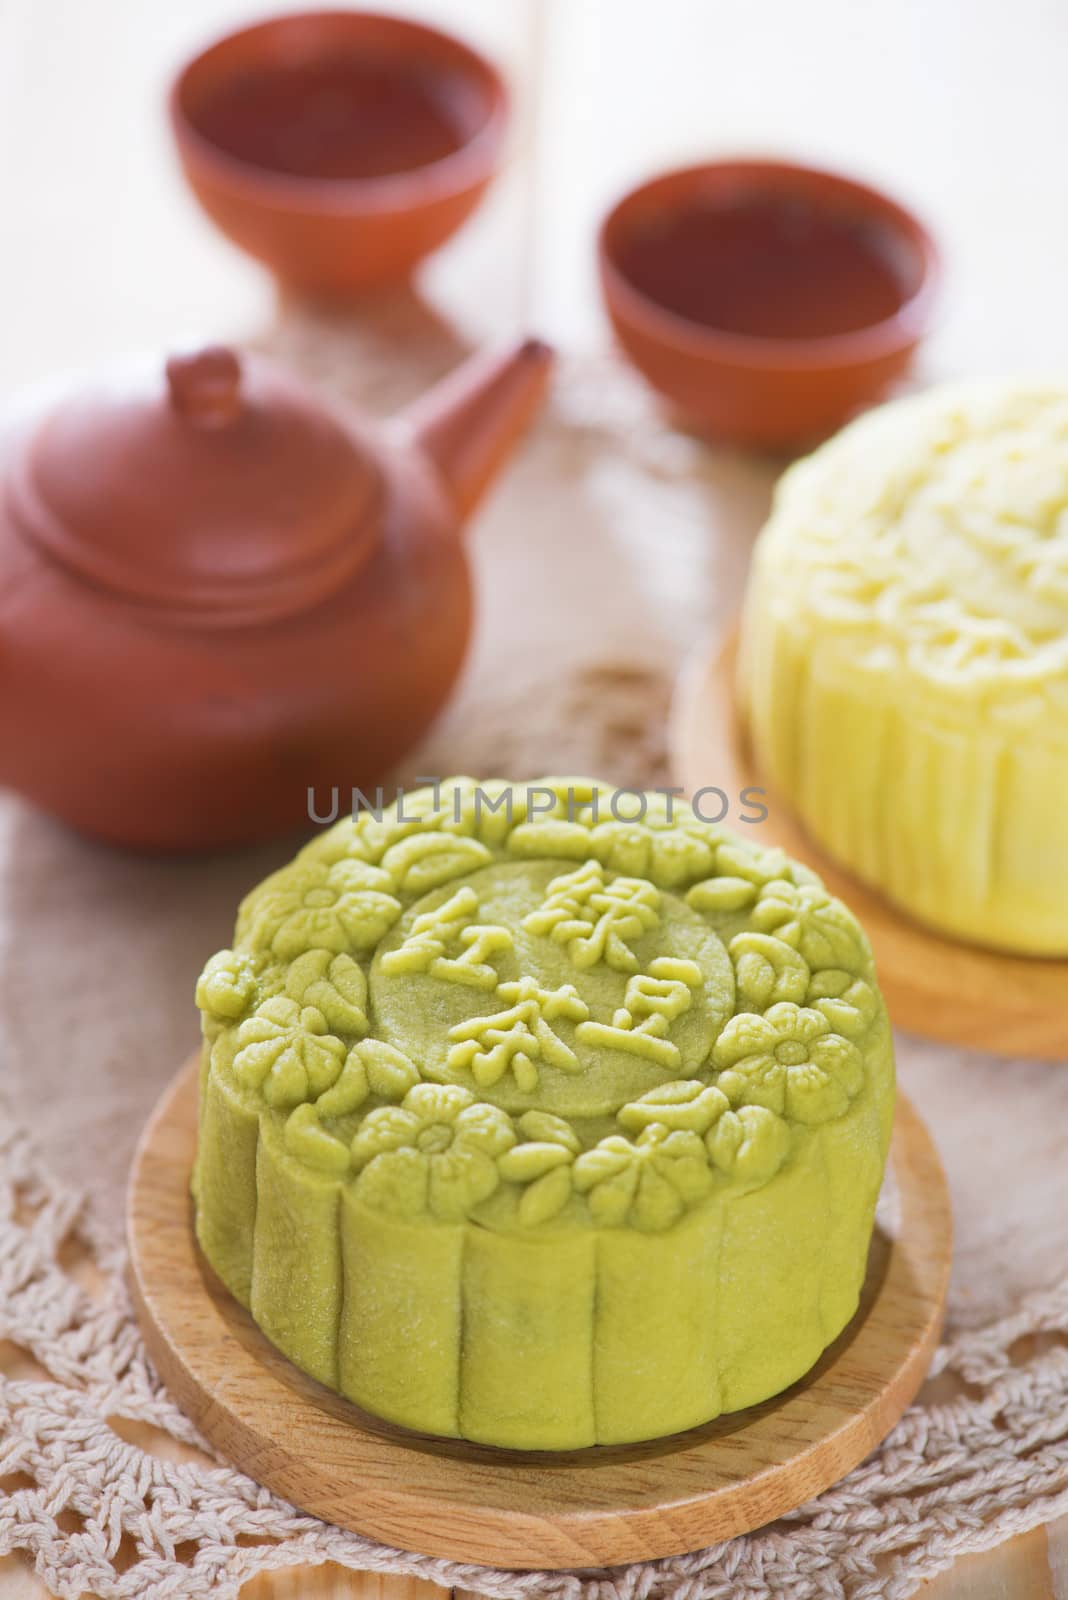 Snowy skin mooncakes.  Traditional Chinese mid autumn festival food and tea set. The Chinese words on the mooncakes means green tea with red bean paste and lotus paste, not a logo or trademark.